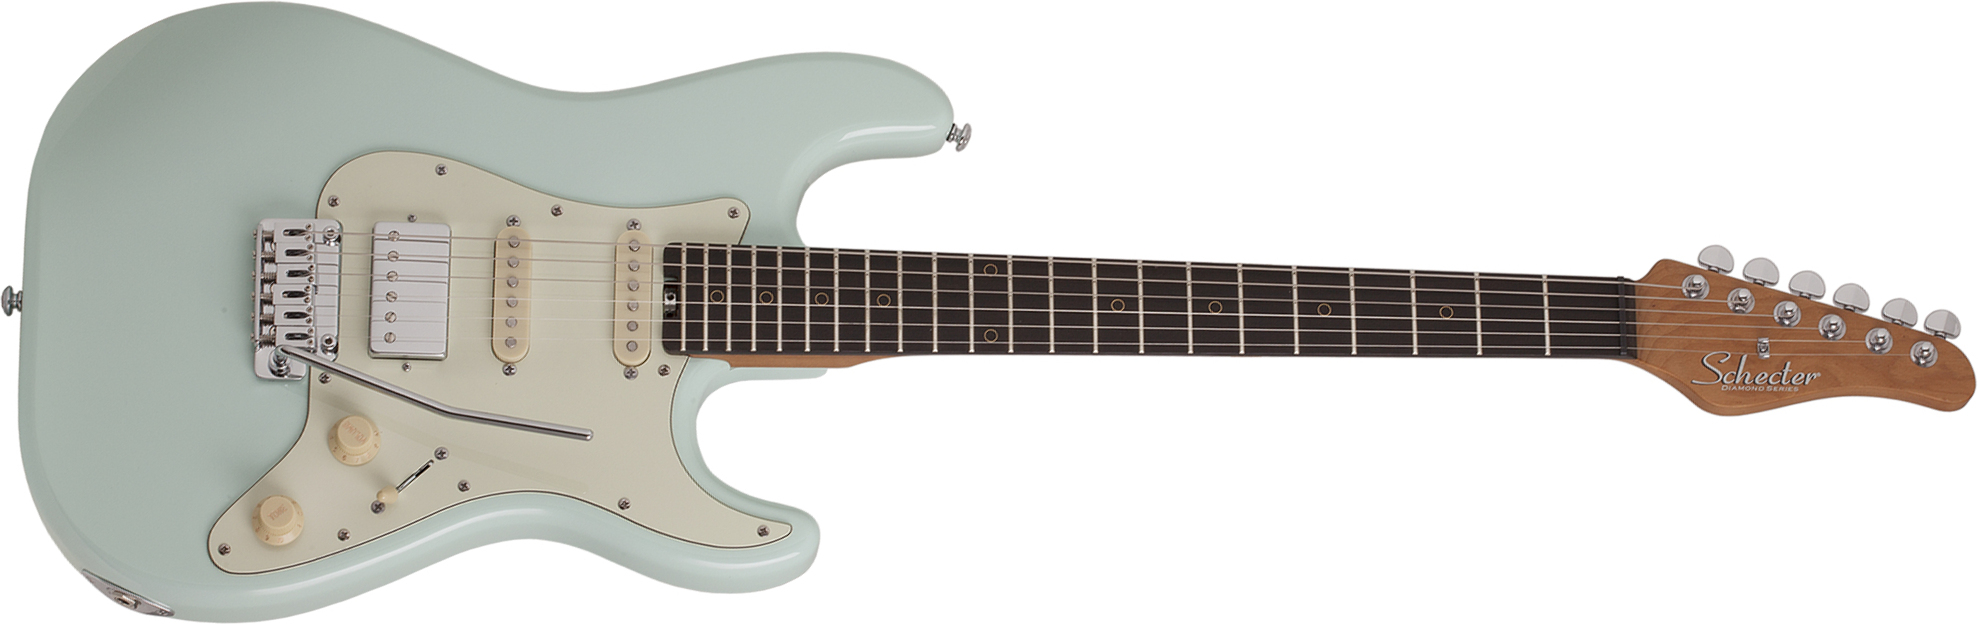 Schecter Nick Johnston Traditional Hss Trem Eb - Atomic Frost - Str shape electric guitar - Main picture